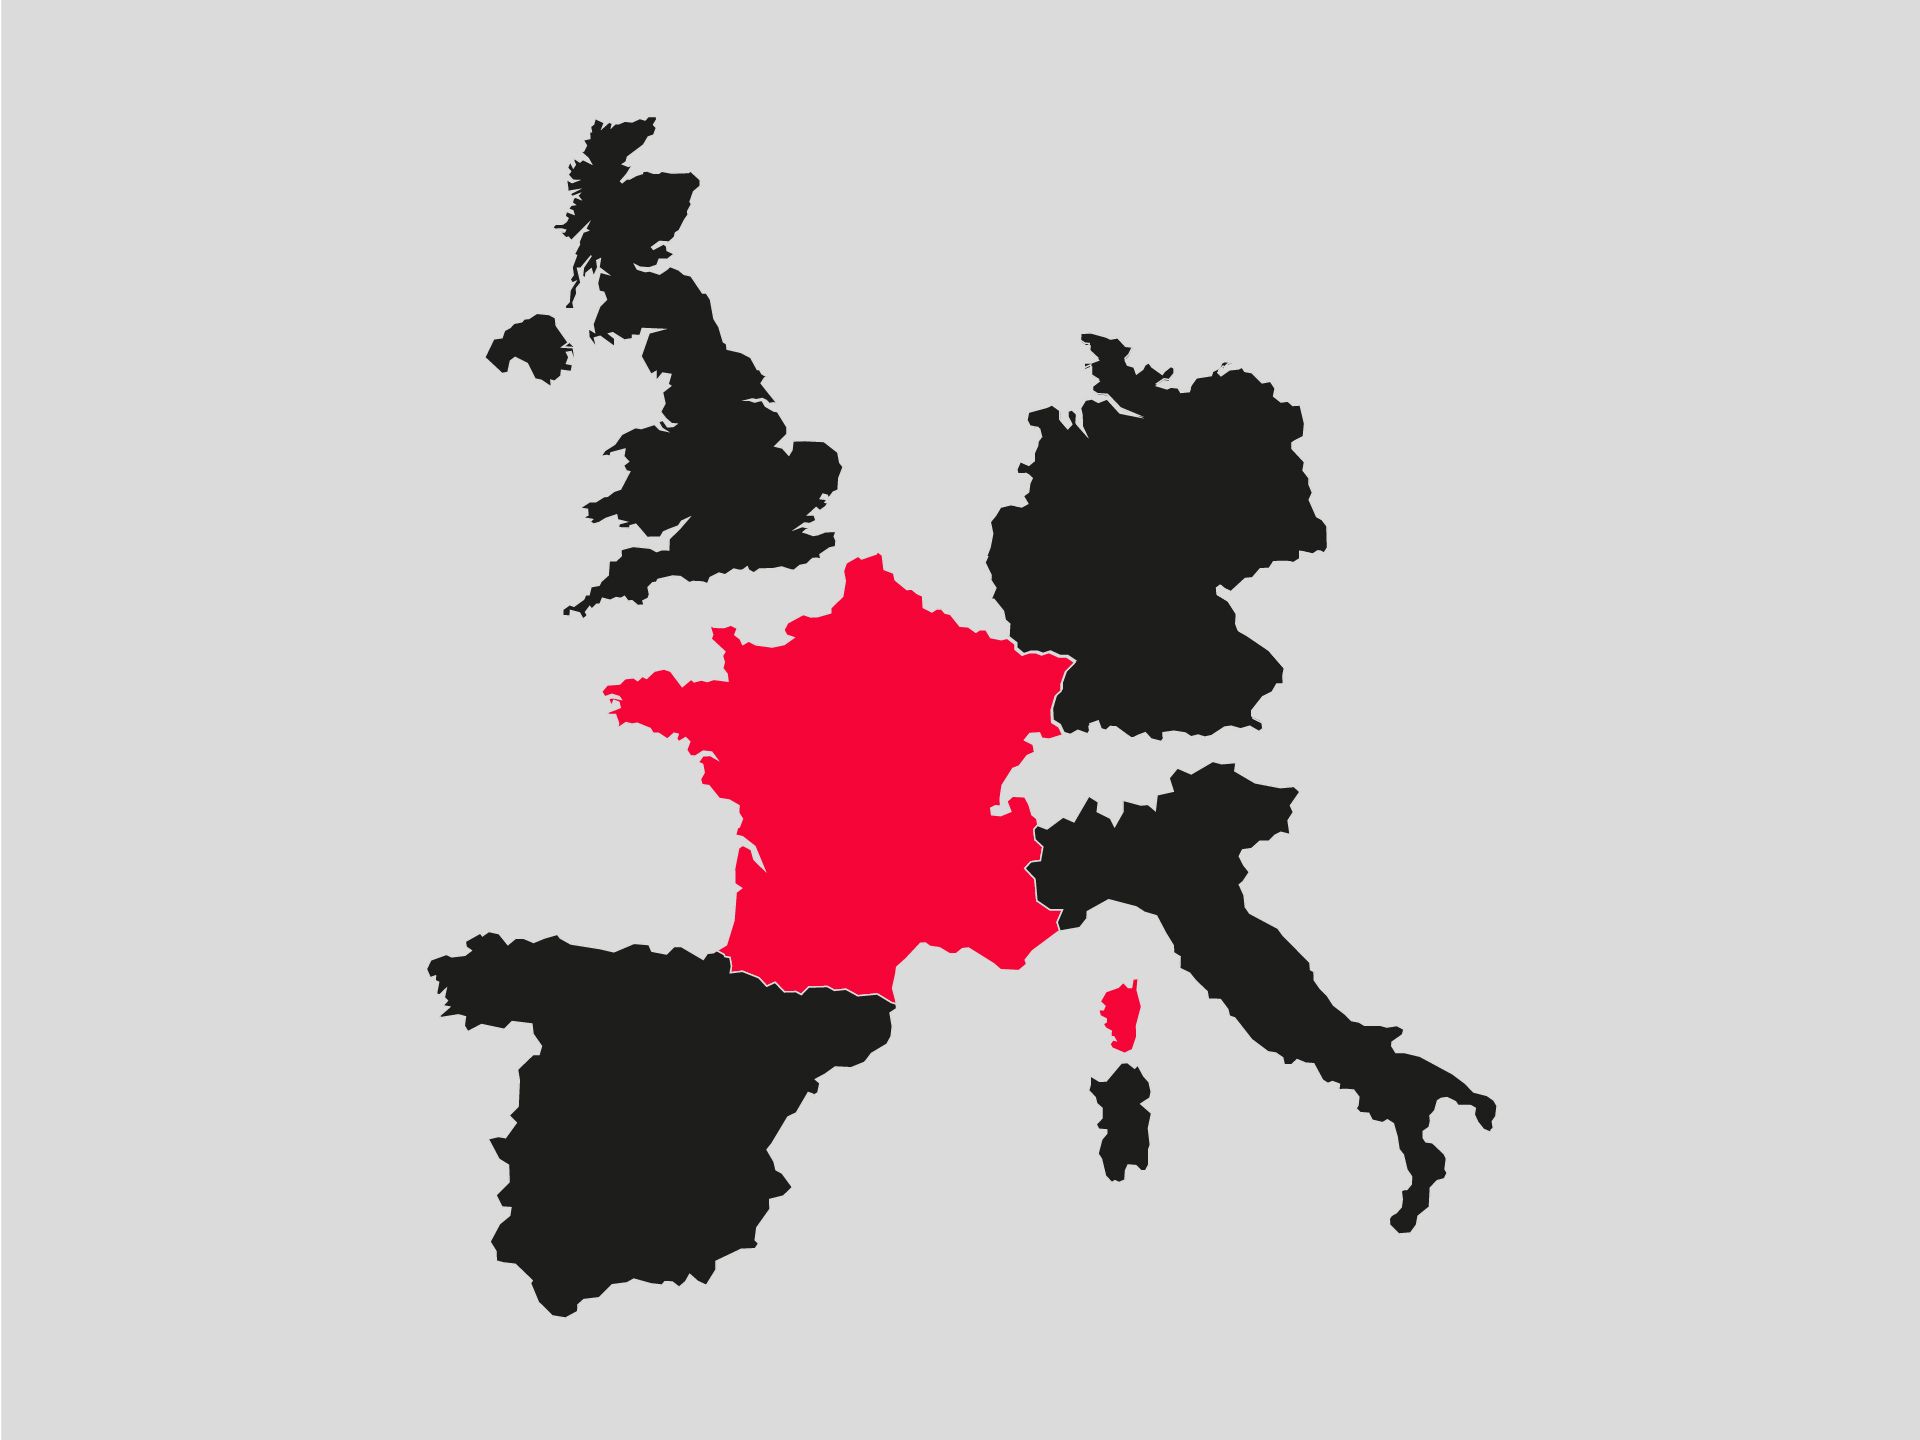 The map shows Europe with France highlighted in color.